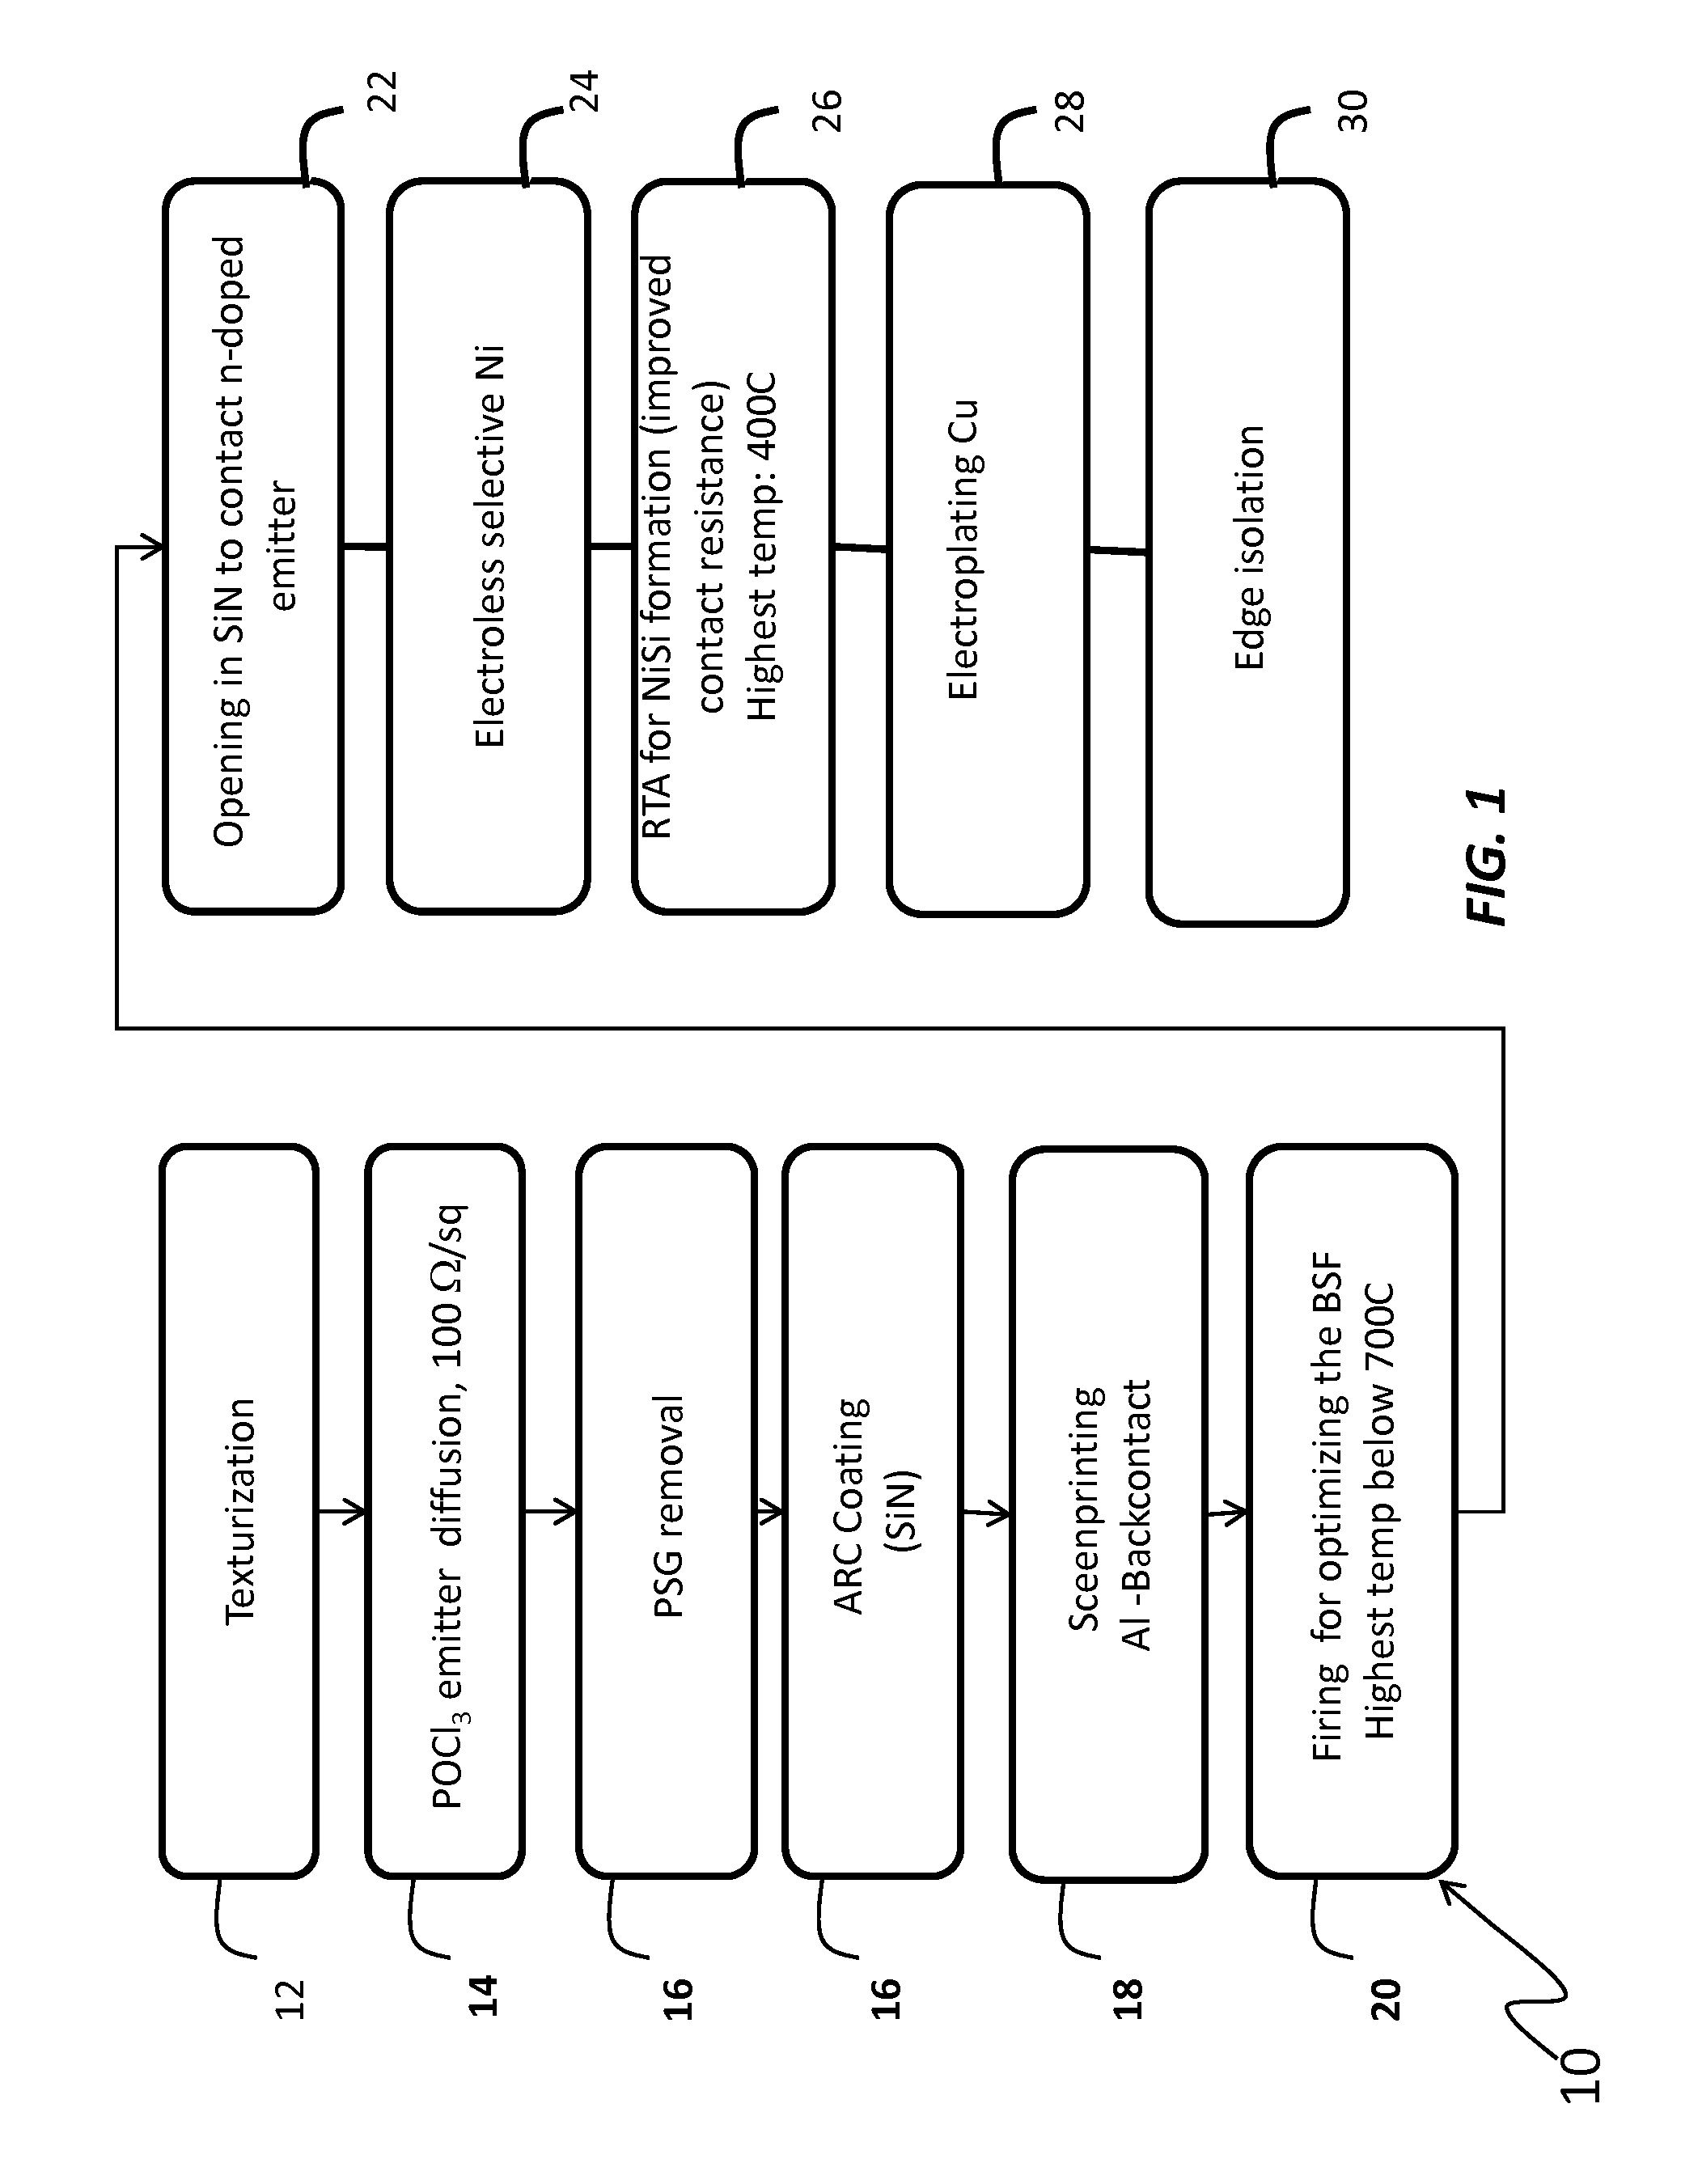 Solar cell and fabrication method using crystalline silicon based on lower grade feedstock materials